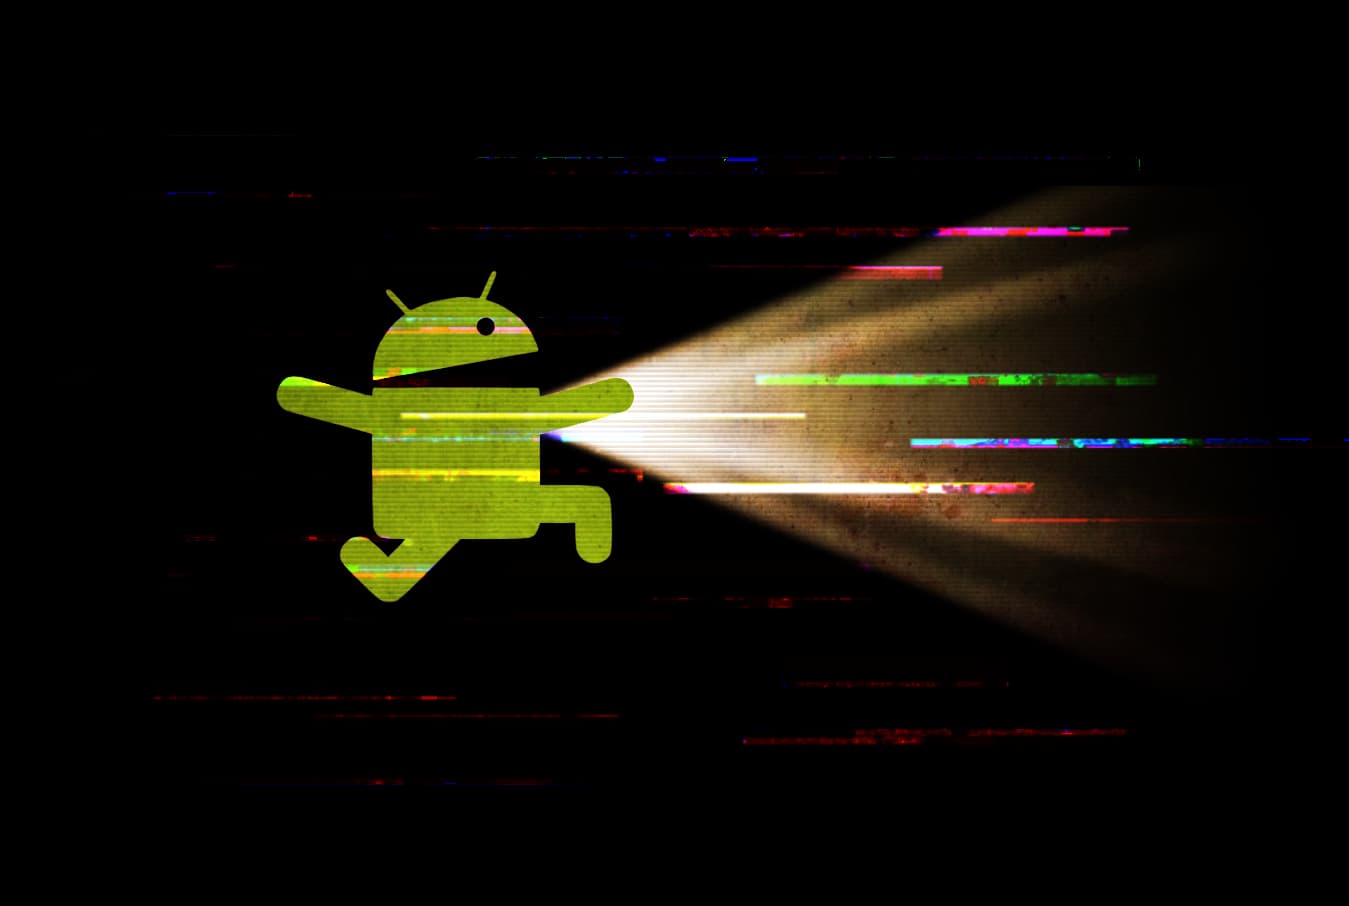 Flashlight apps are scamming android users en masse